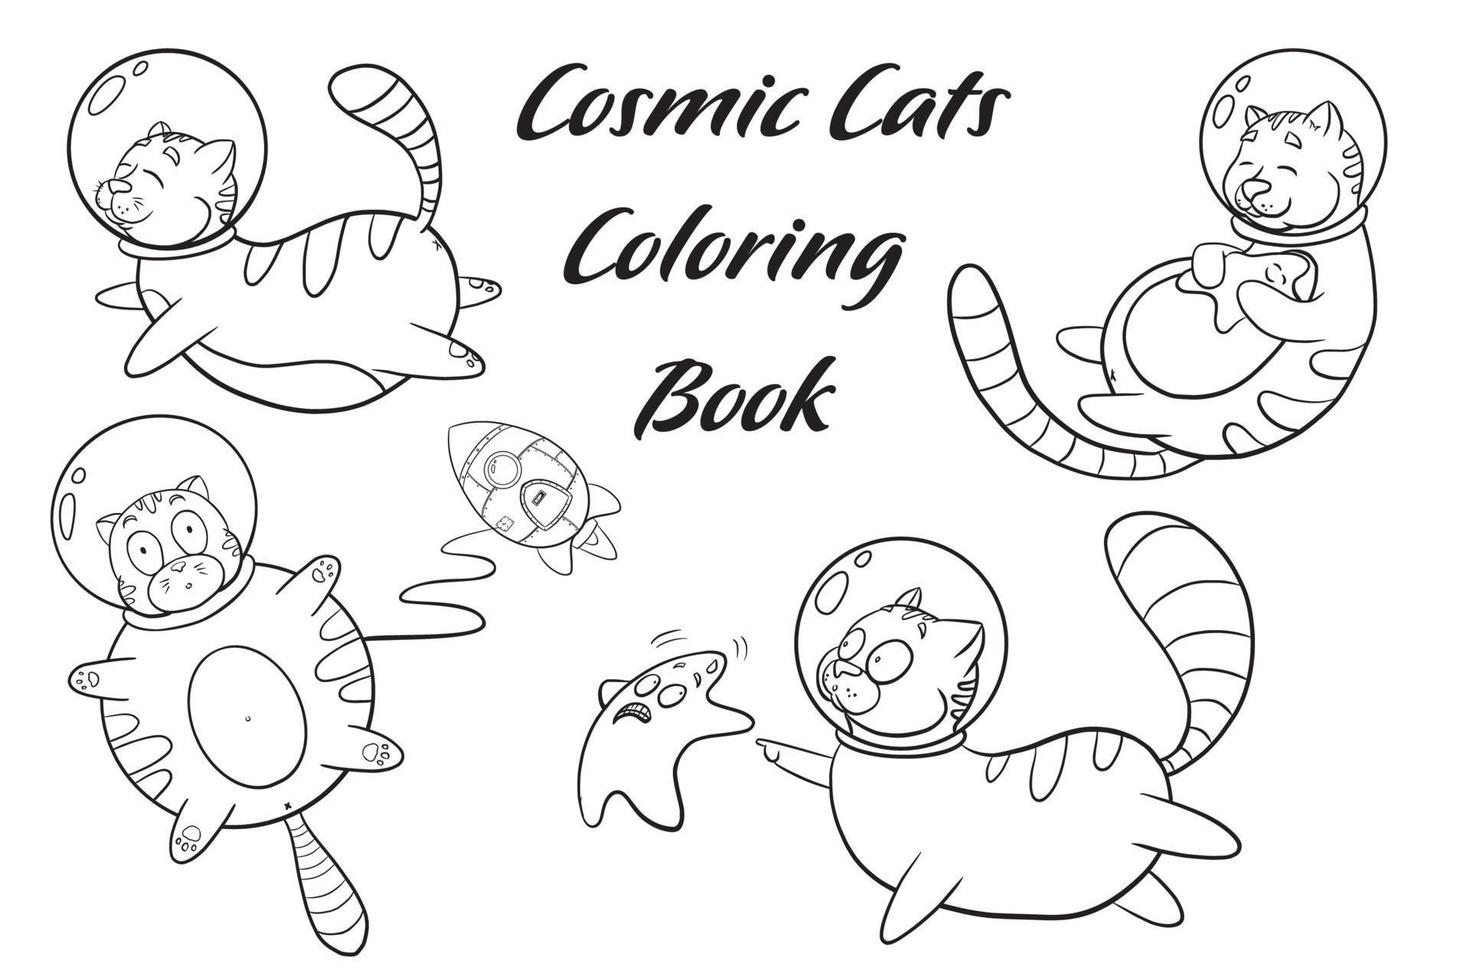 Cartoon Cats in Space Coloring Page vector